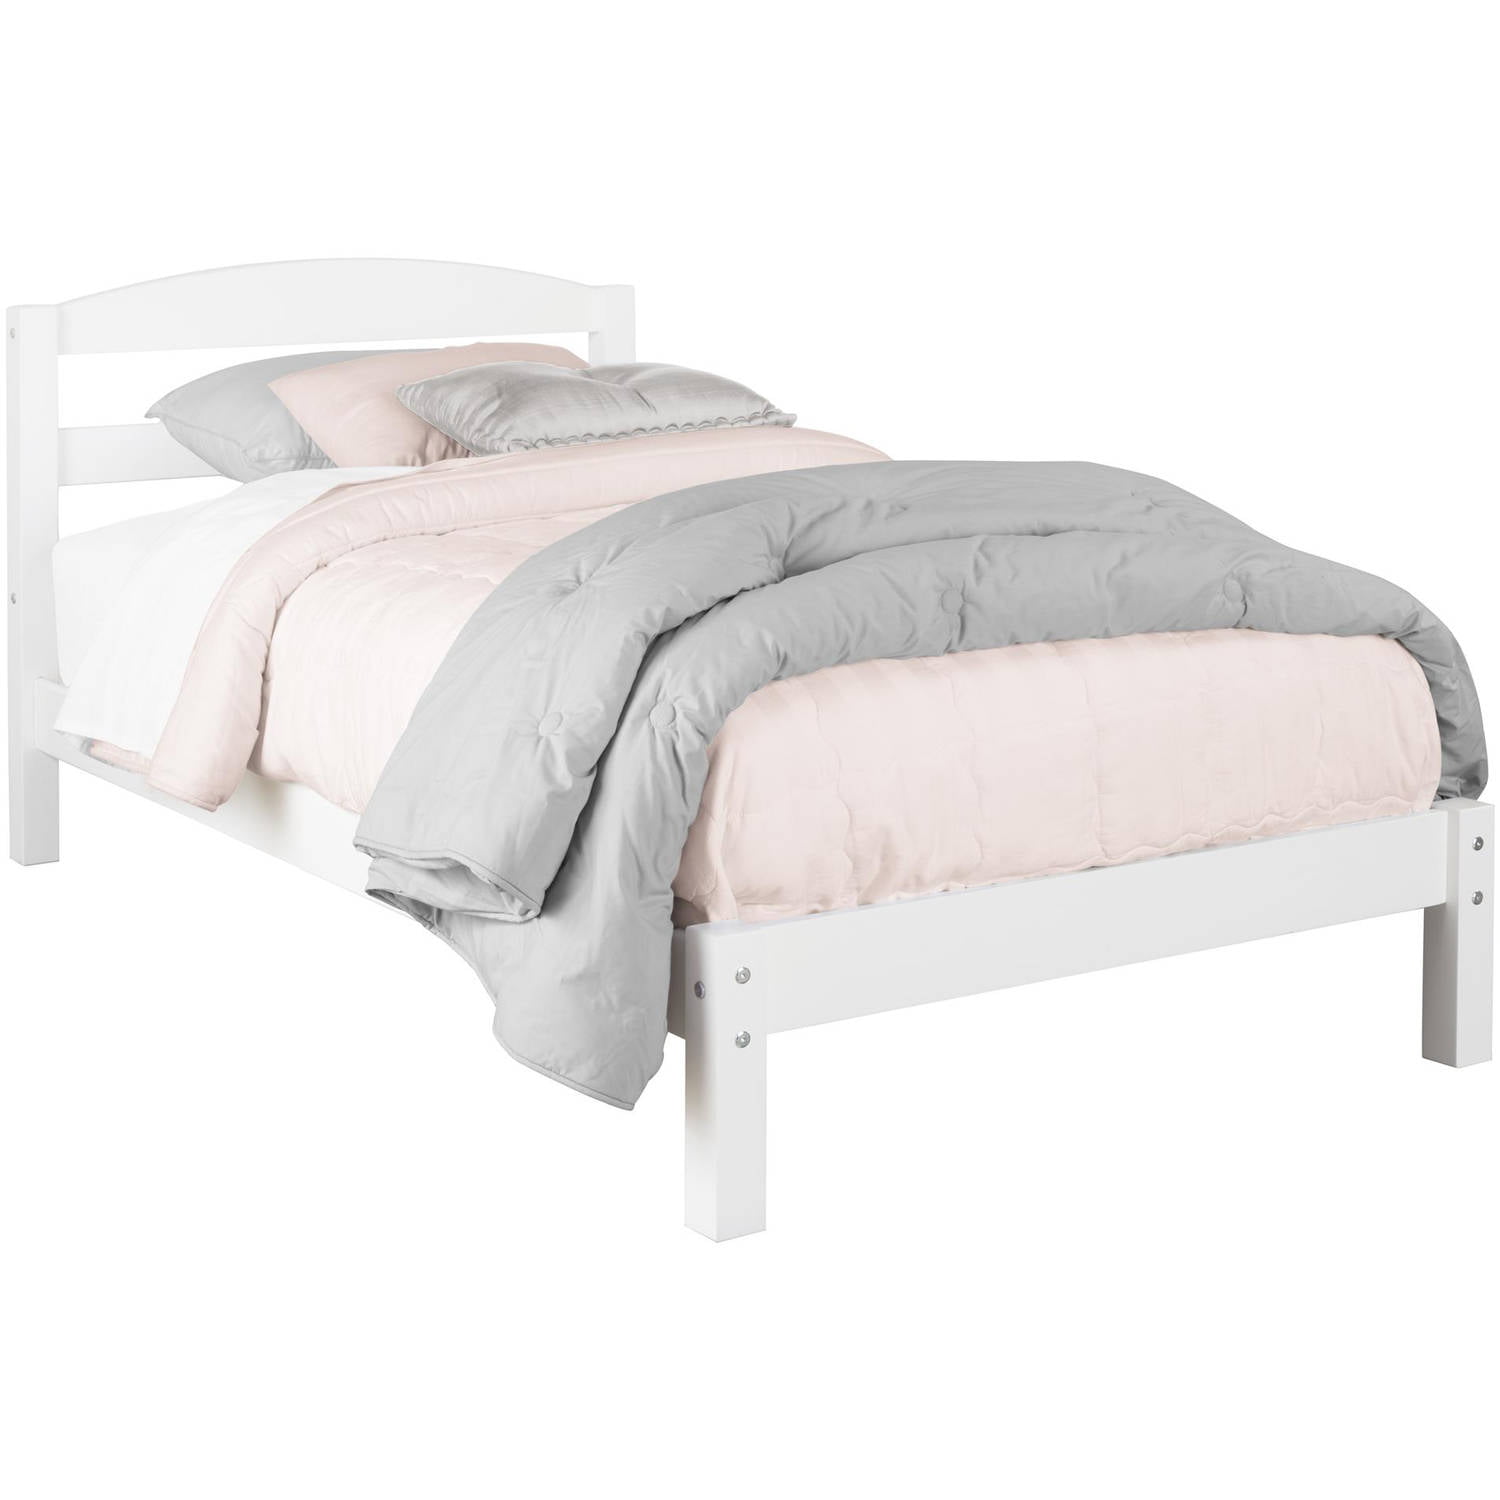 girls twin size bed frame